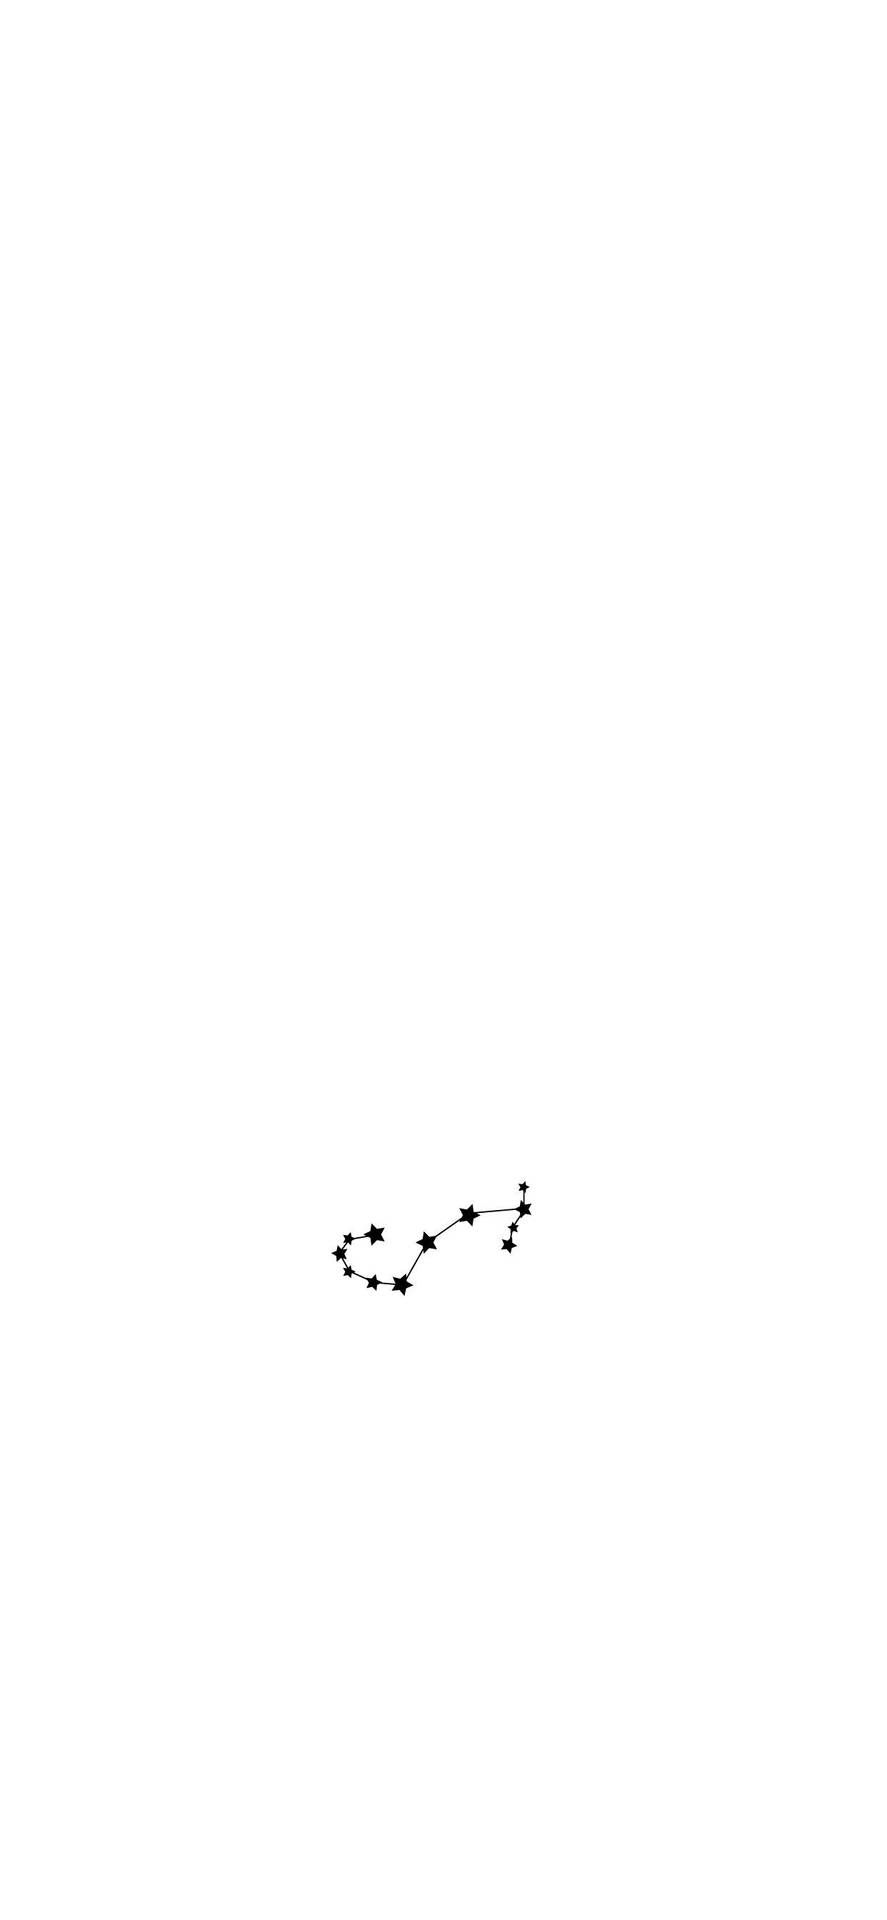 A black and white image of a constellation - Scorpio